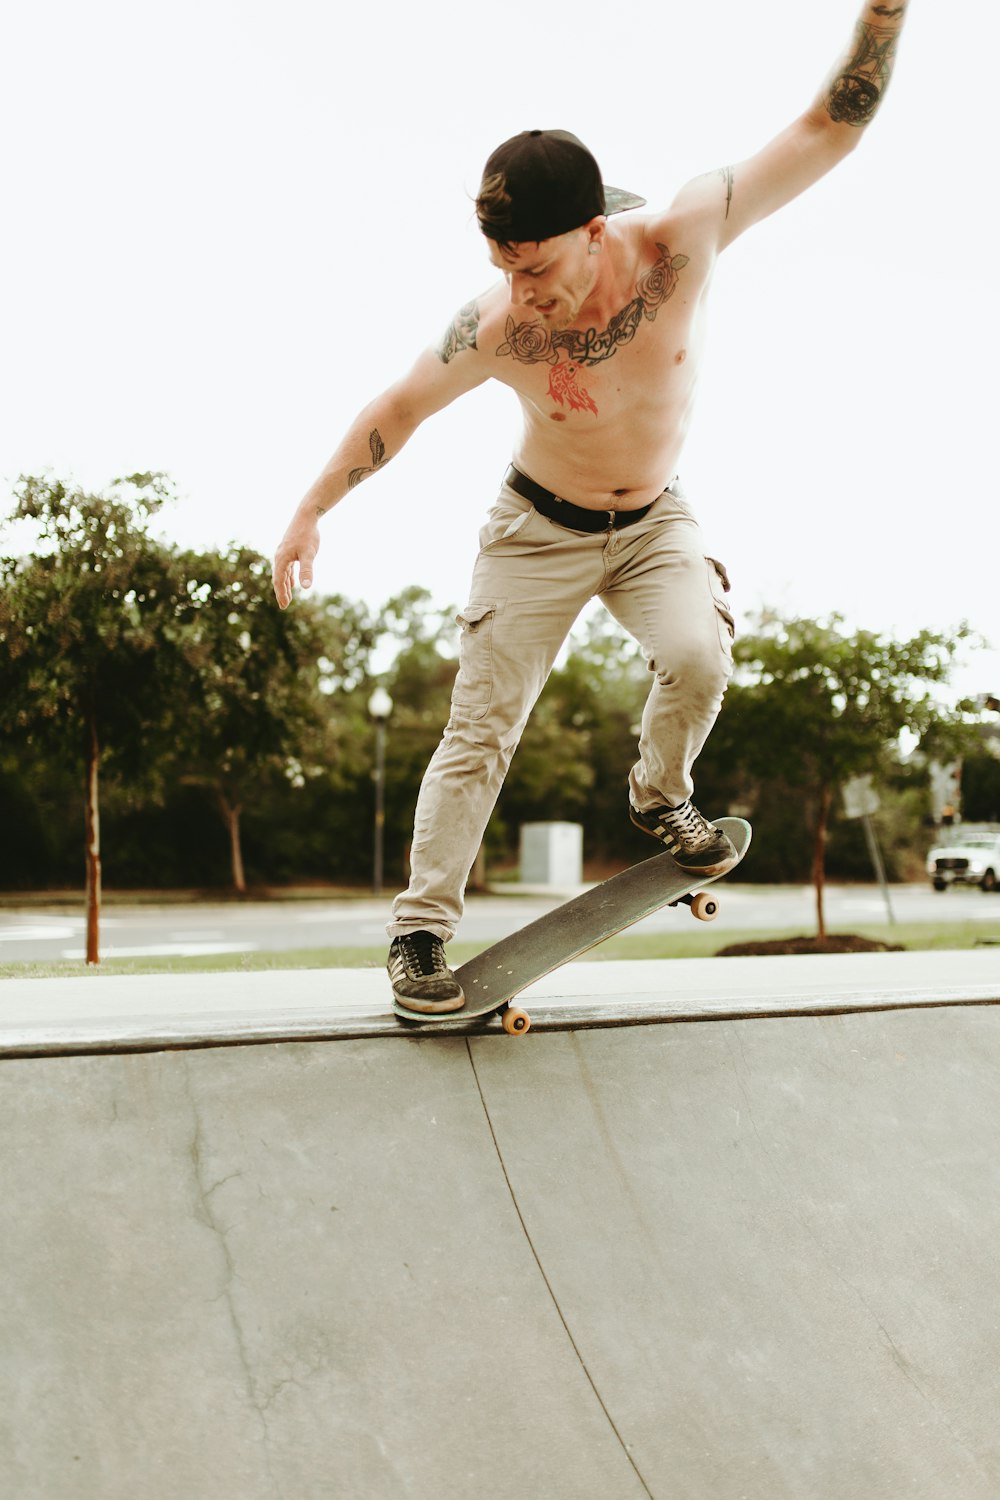 unknown person skateboarding outdoors